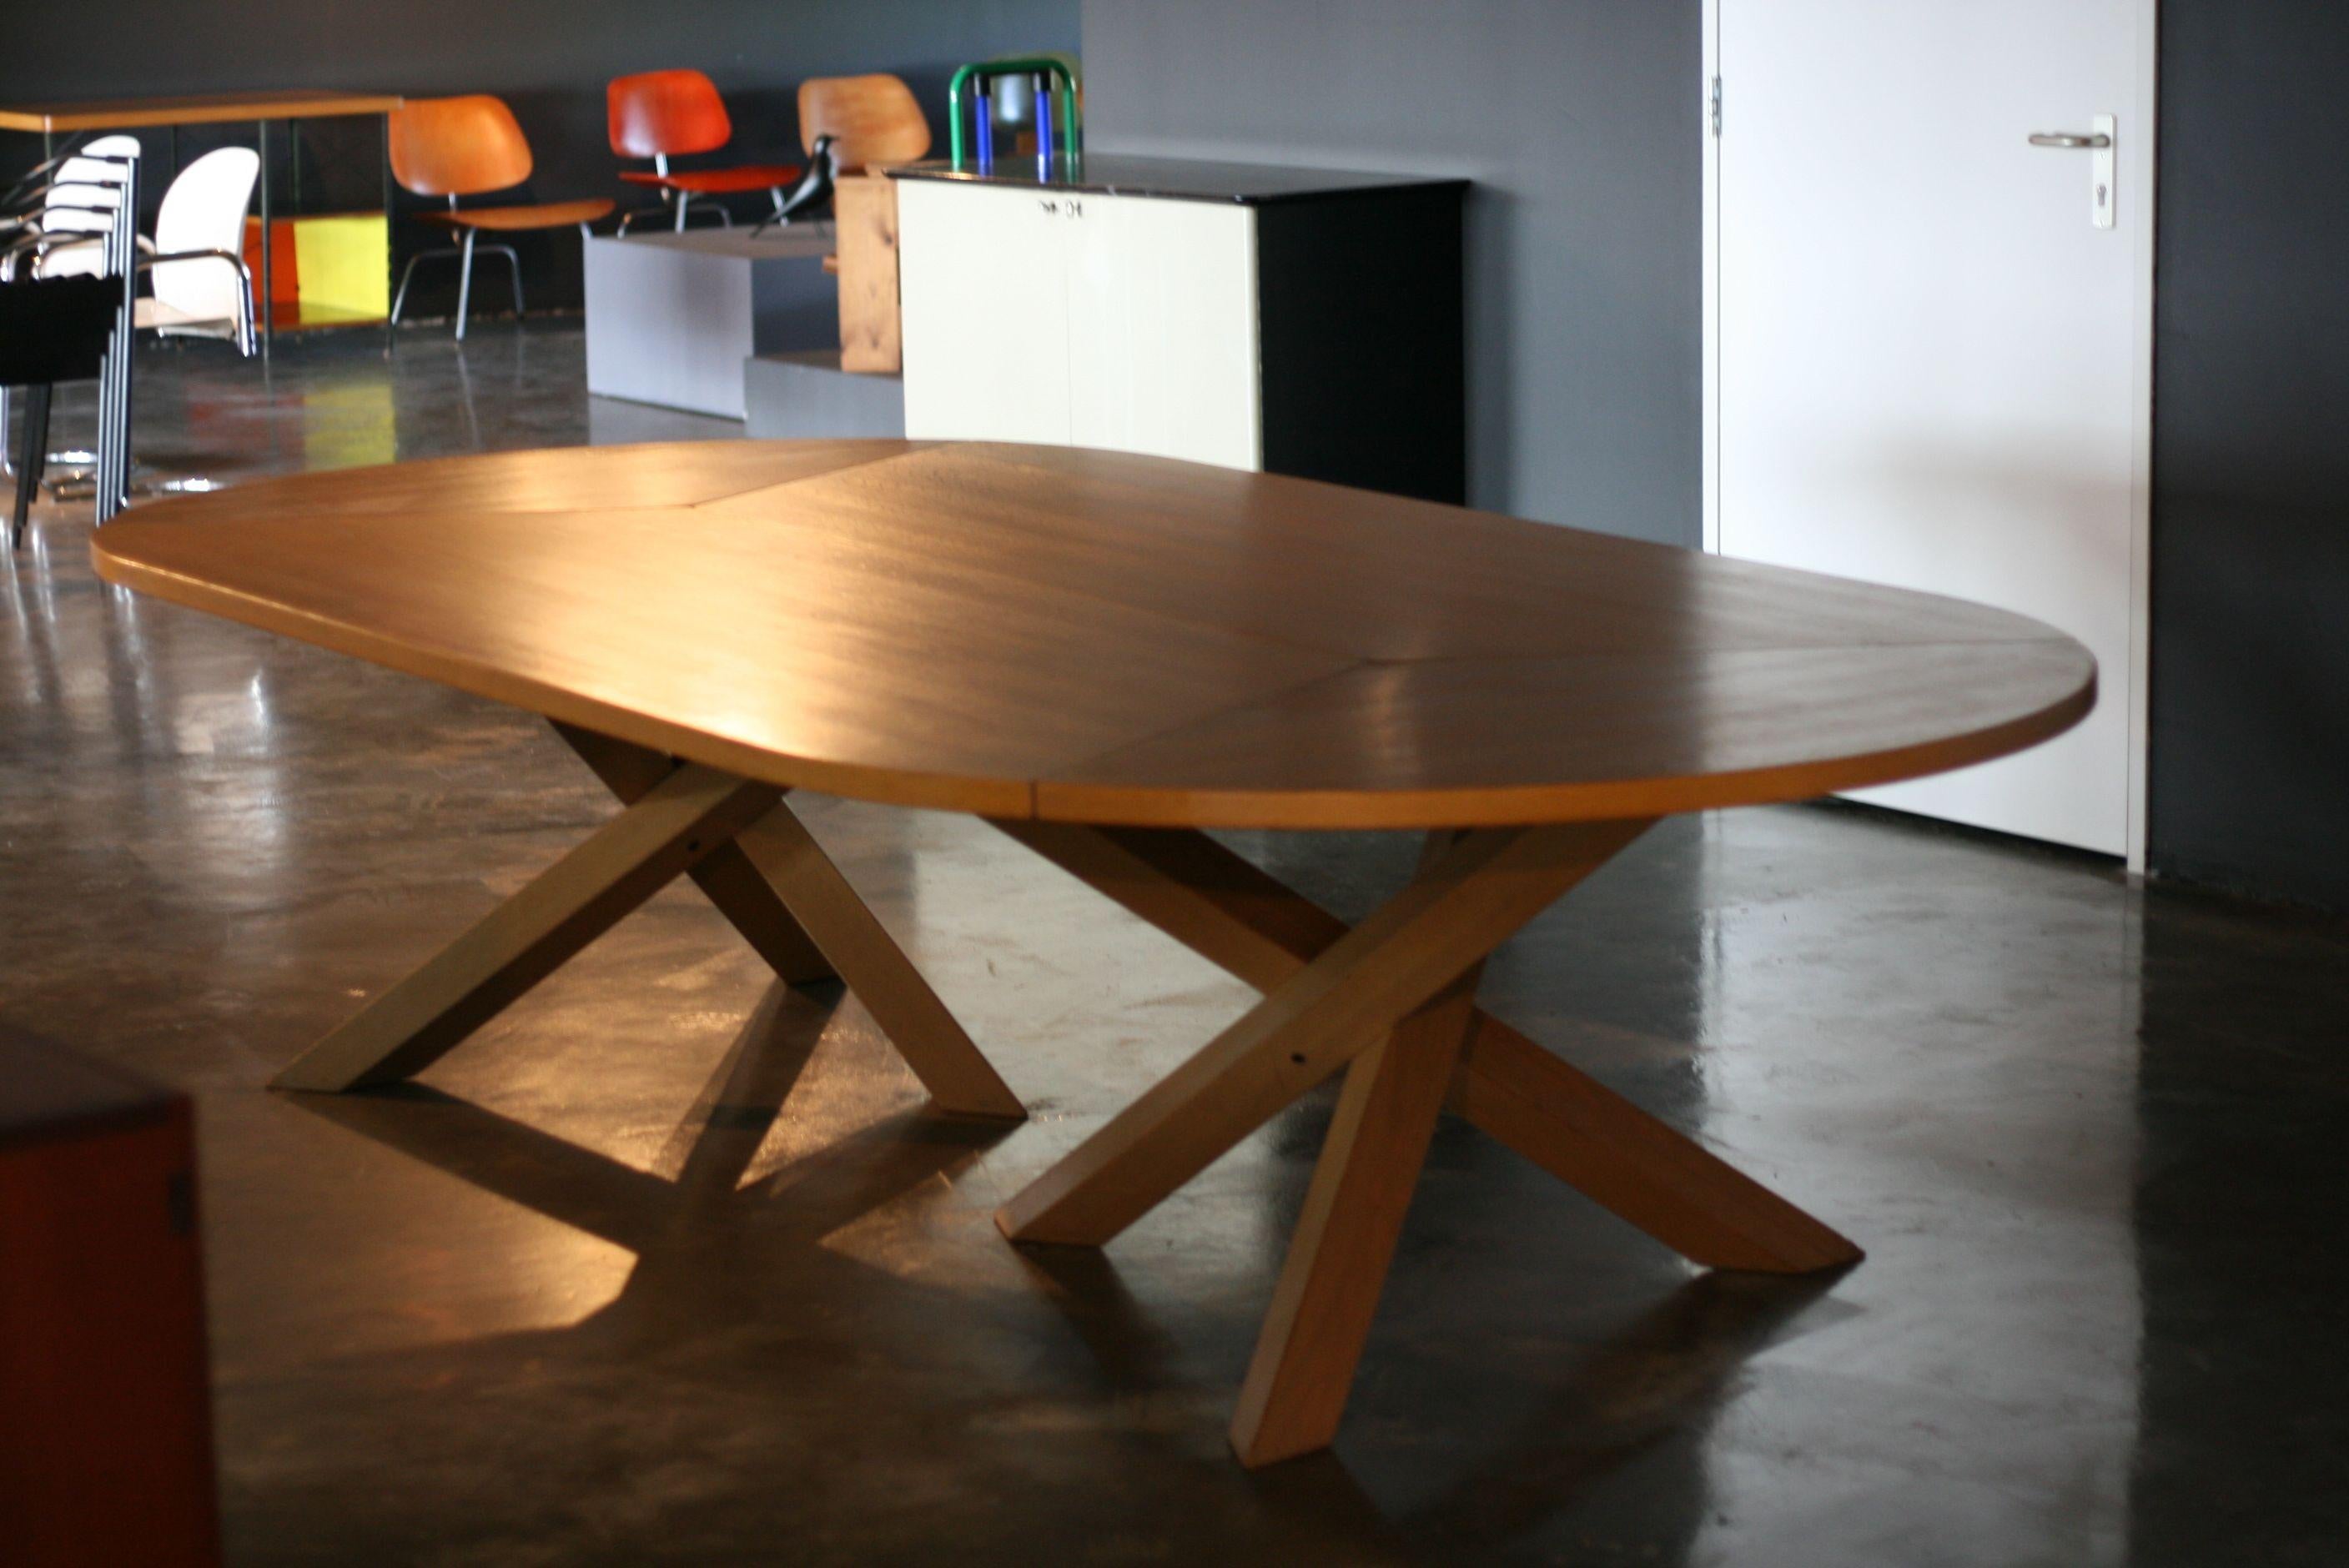 Large oak dining or conference table by Martin Visser for 't Spectrum, the Netherlands.
The oak top consists of four attached segments, and rests on a pair of crossed solid oak beams.
Very spectacular and rare large Martin Visser